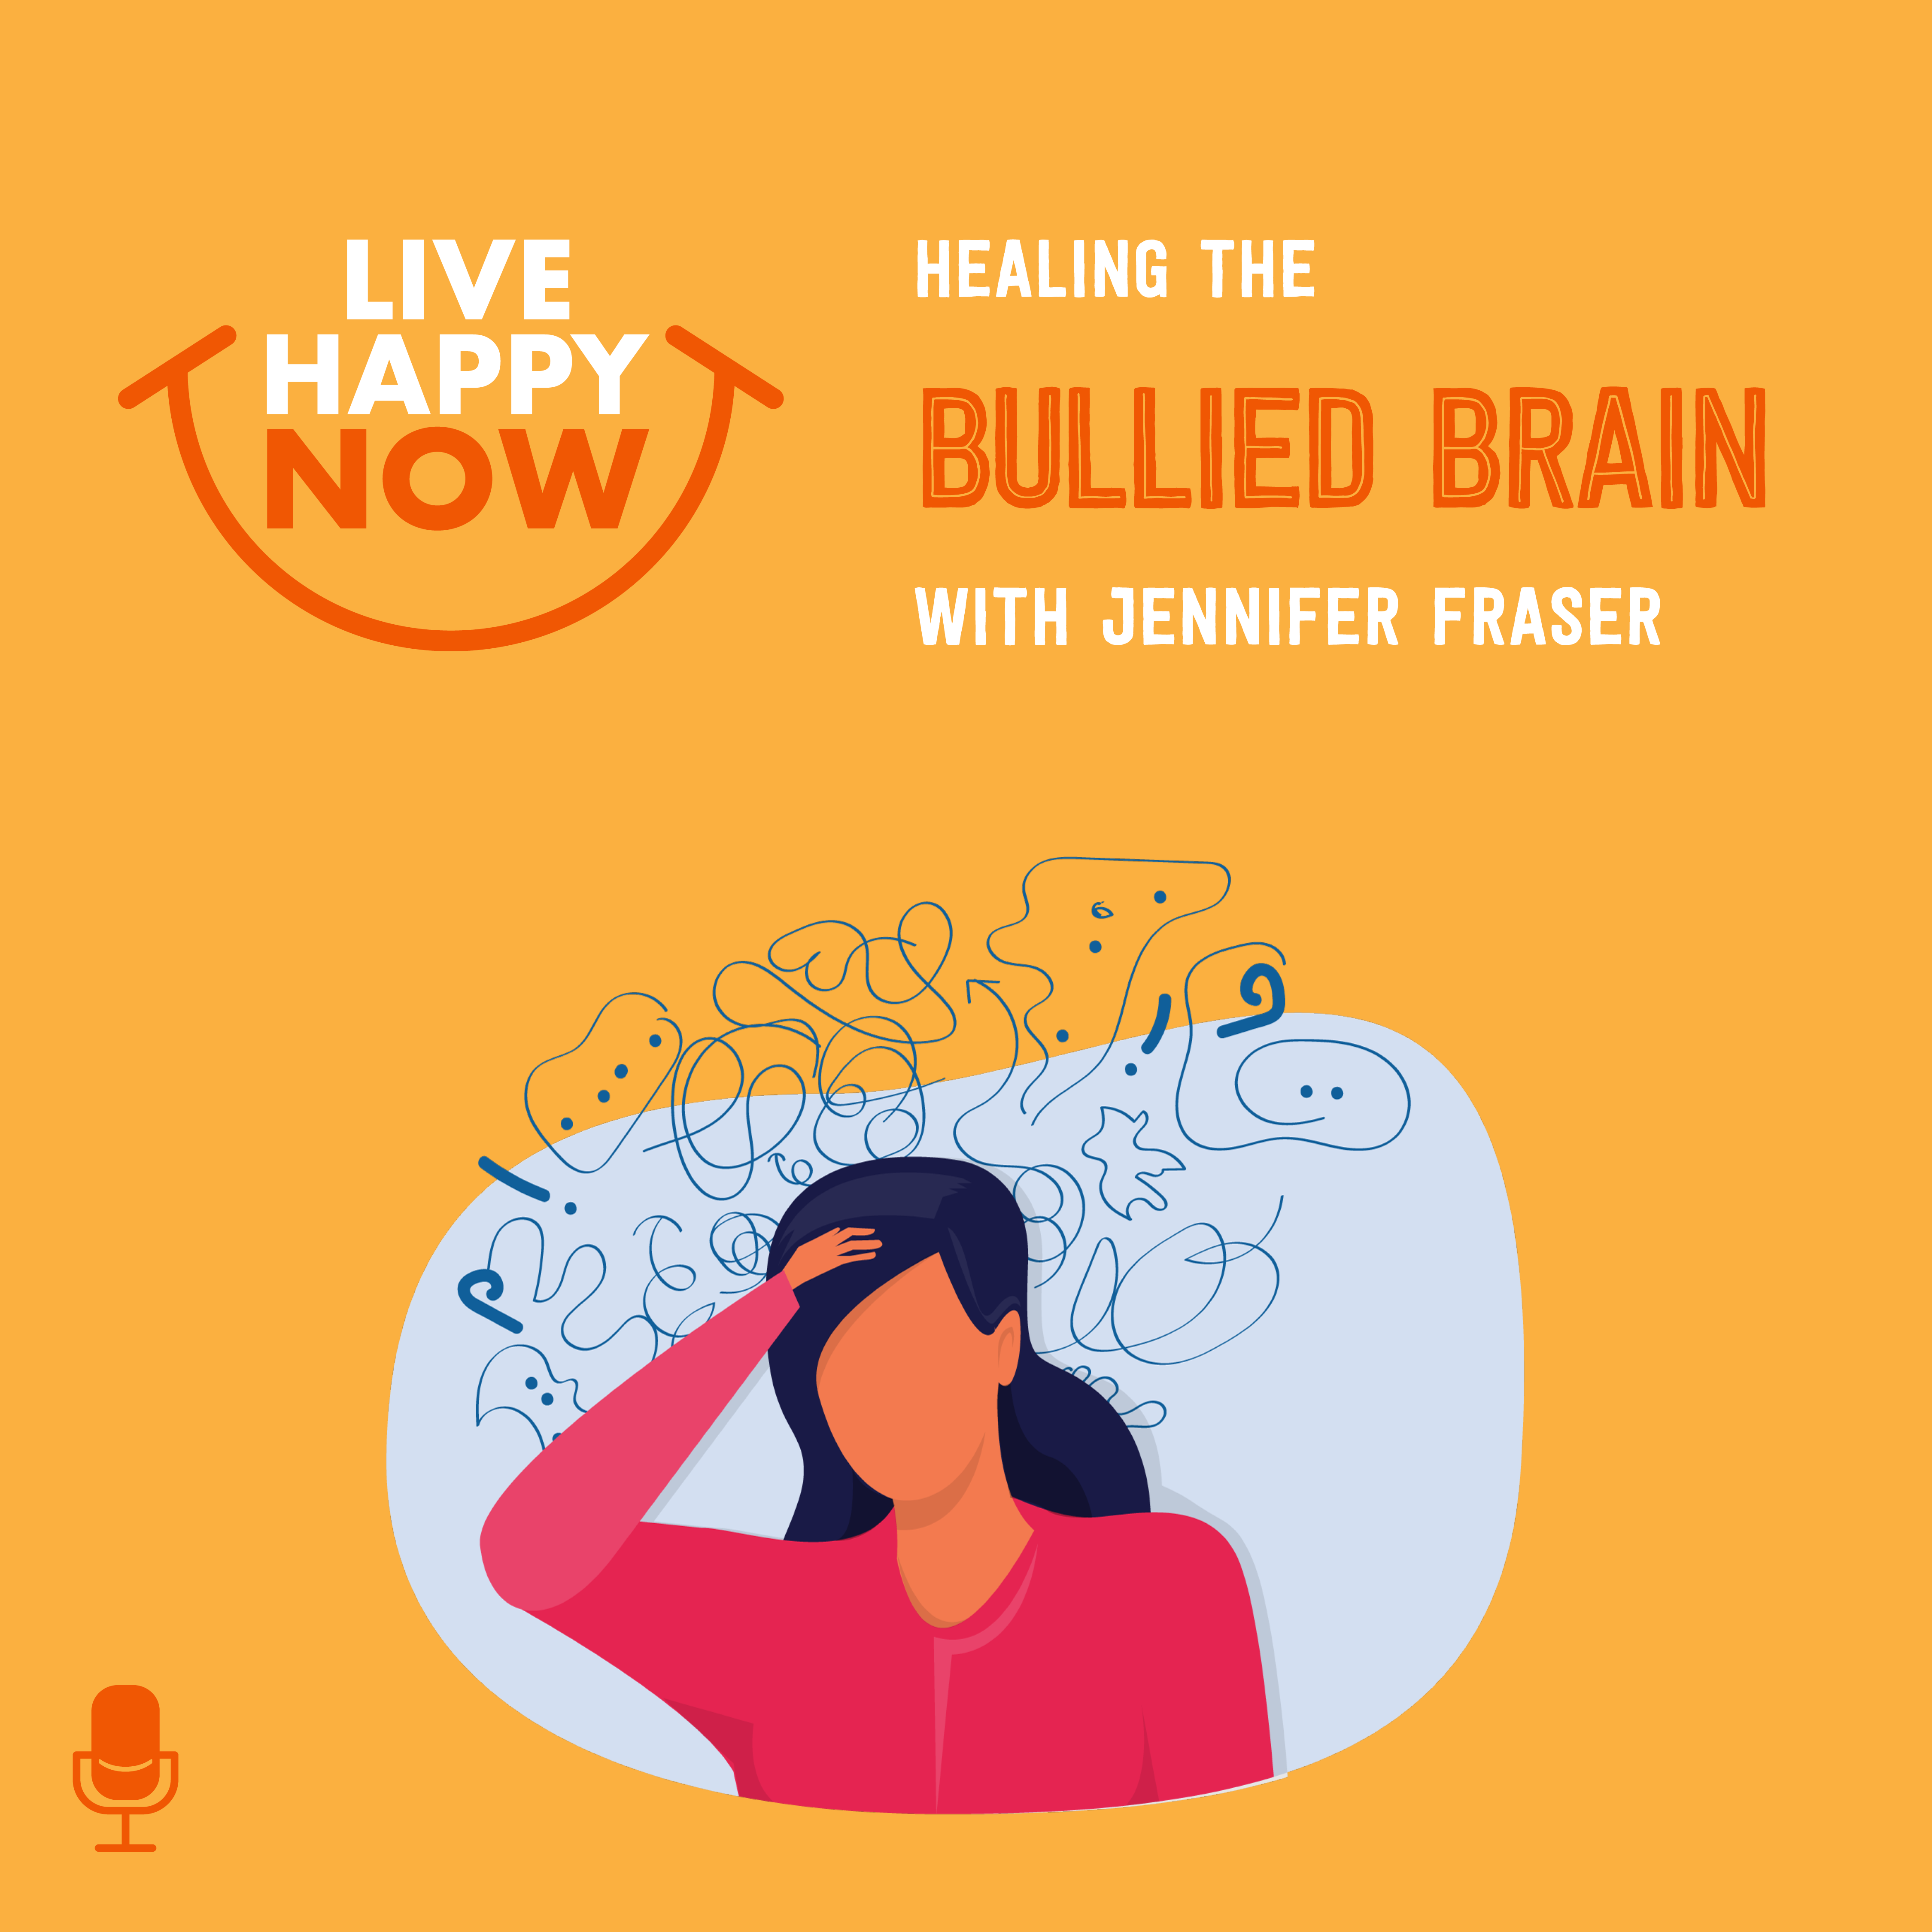 Healing the Bullied the Brain with Jennifer Fraser